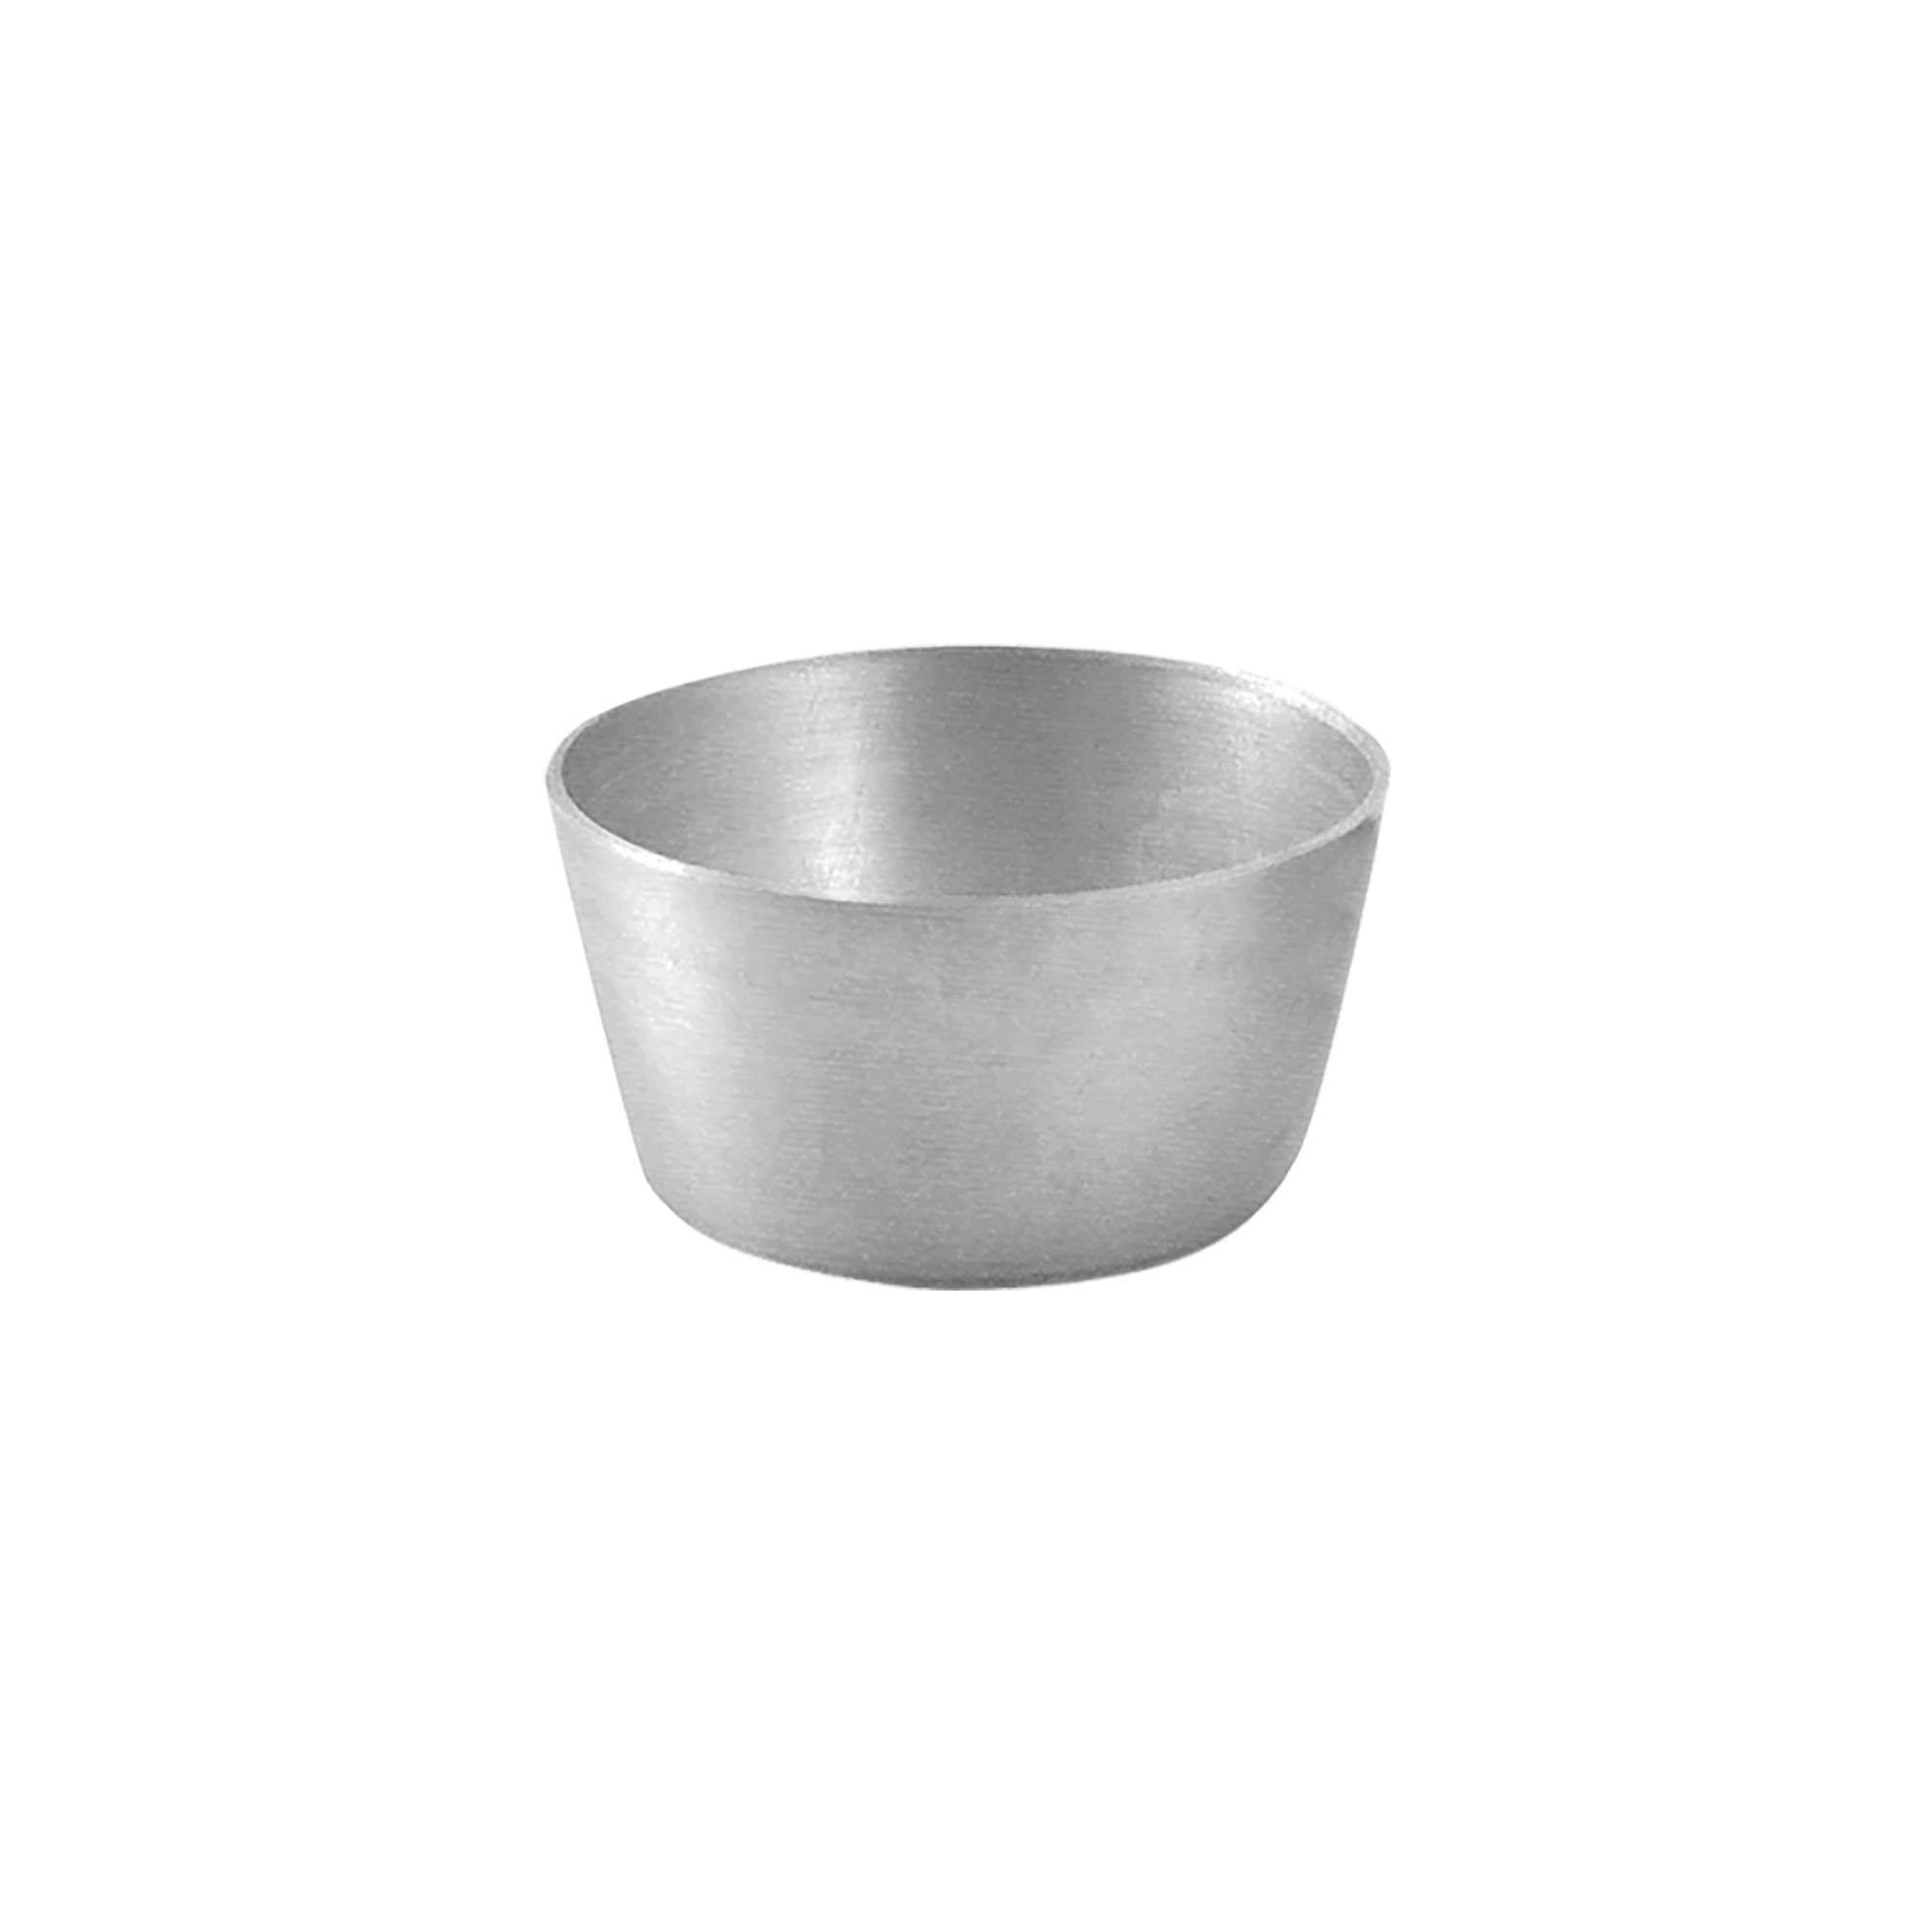 Chef Inox Stainless Steel Pudding Mould 9cm Image 1